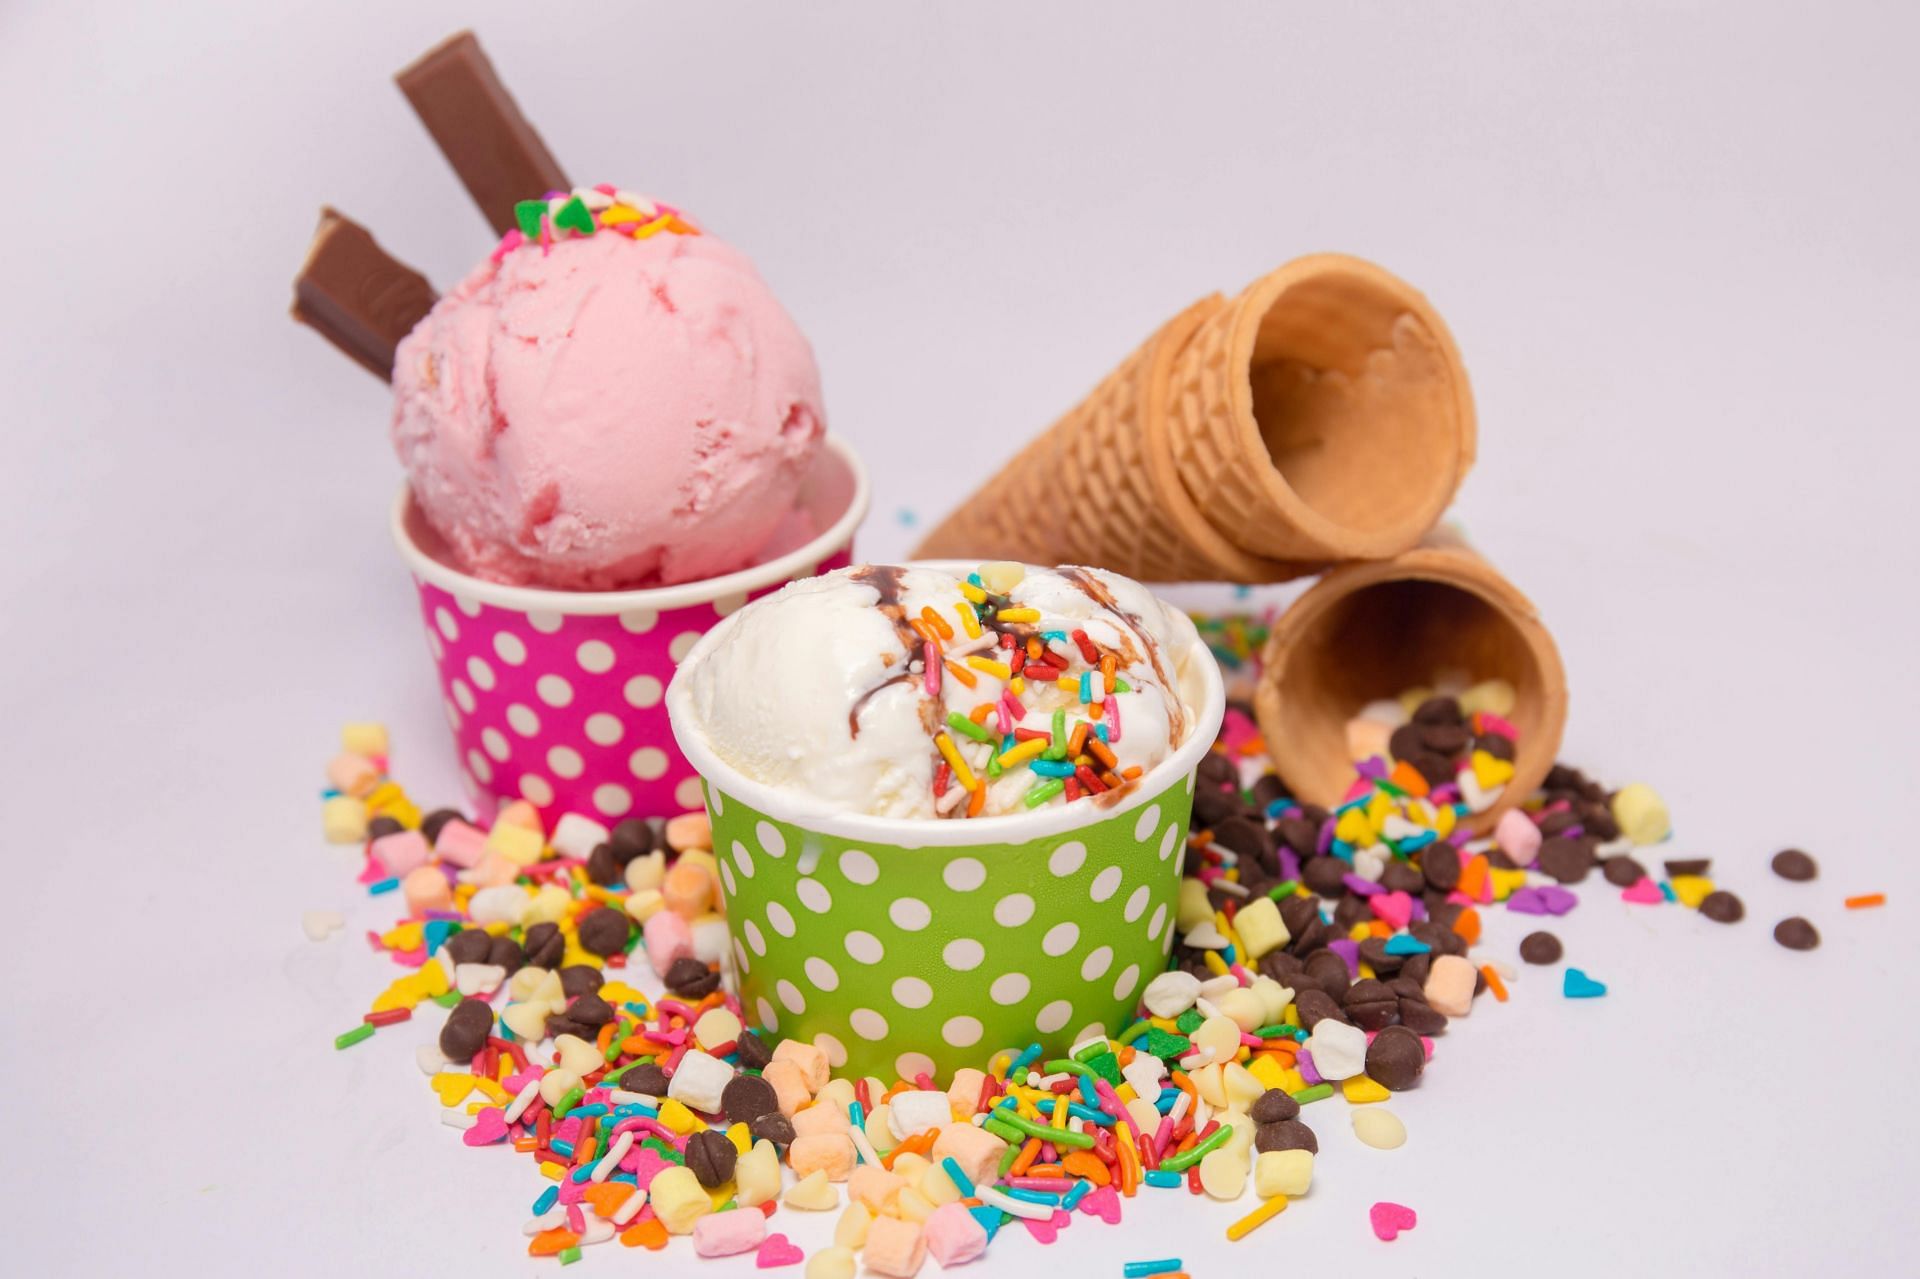 ice cream for sore throat (image sourced via Pexels / Photo by teejay)